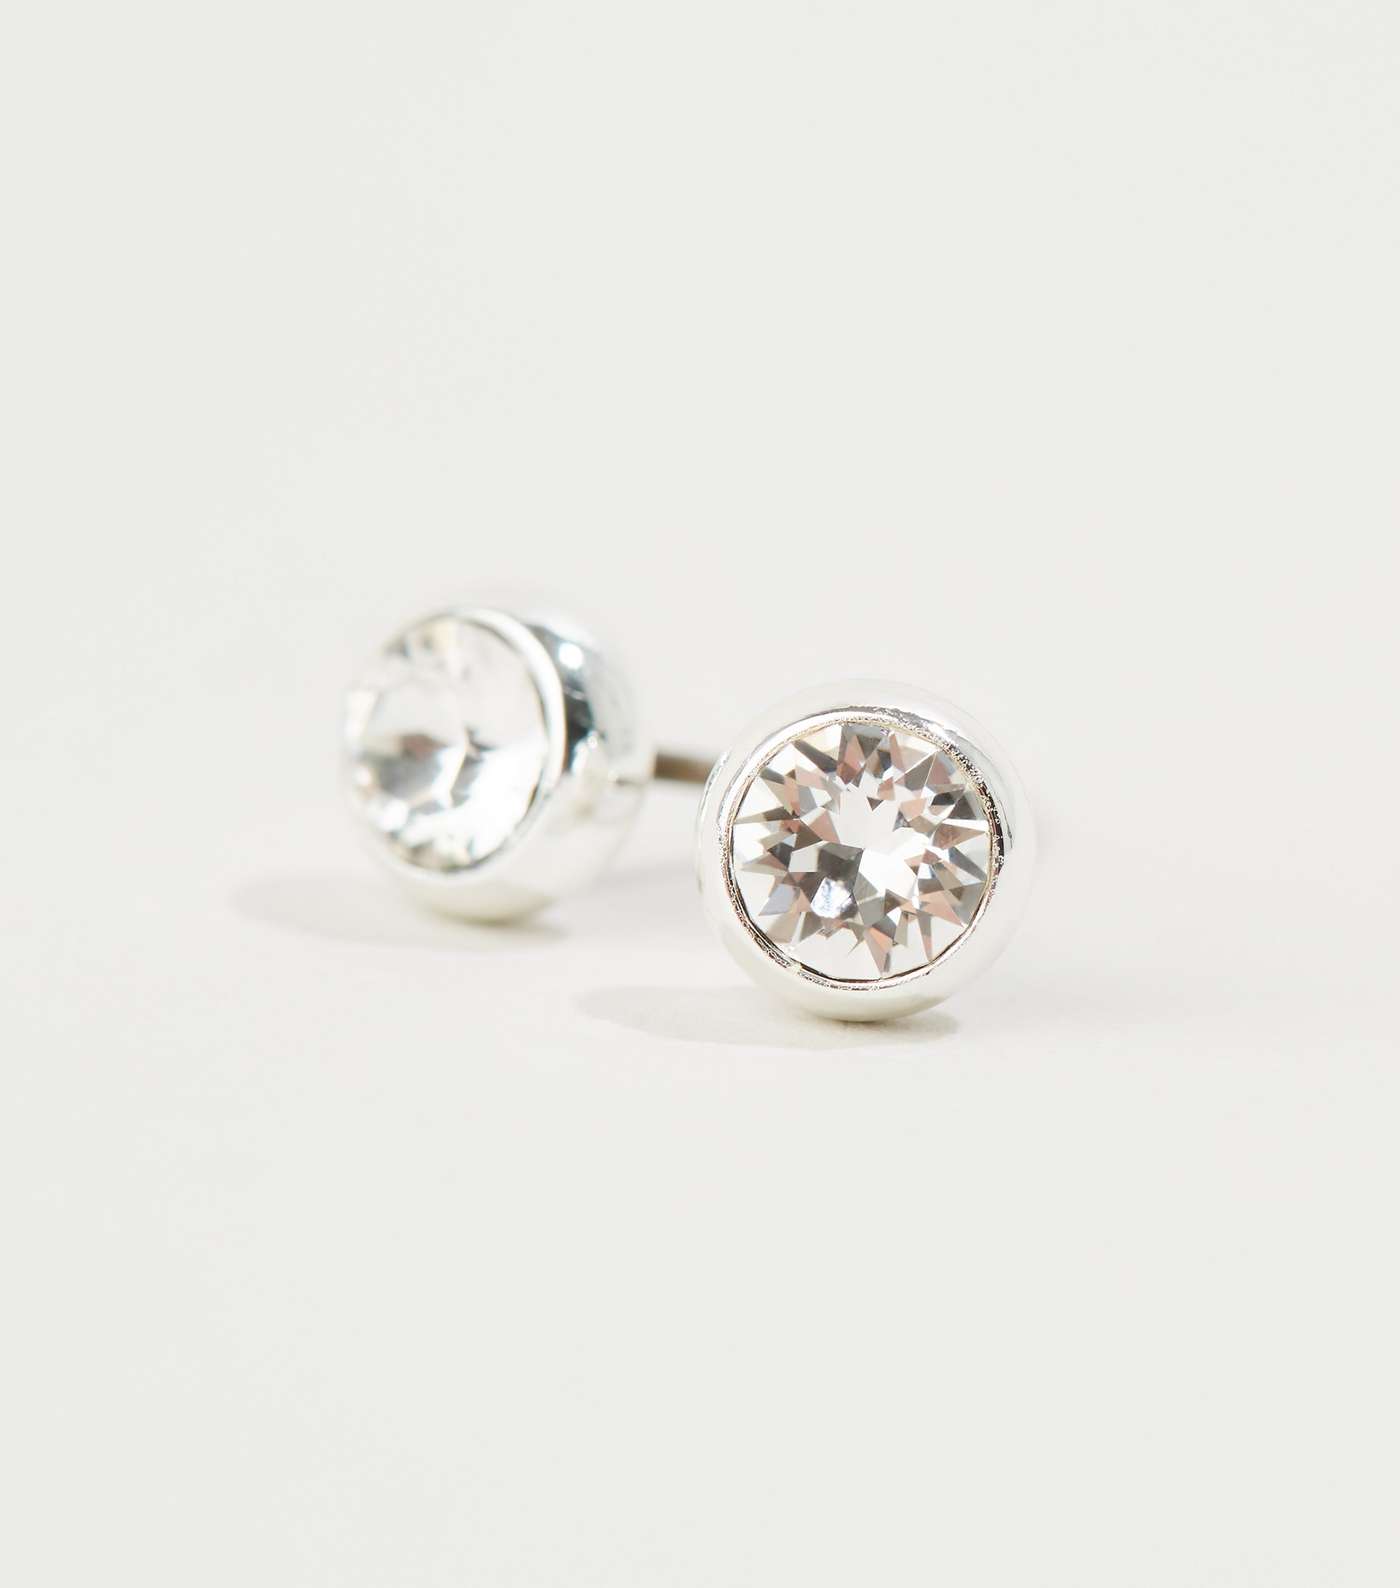 Silver Plated Stud Earrings with Crystals from Swarovski® Image 3